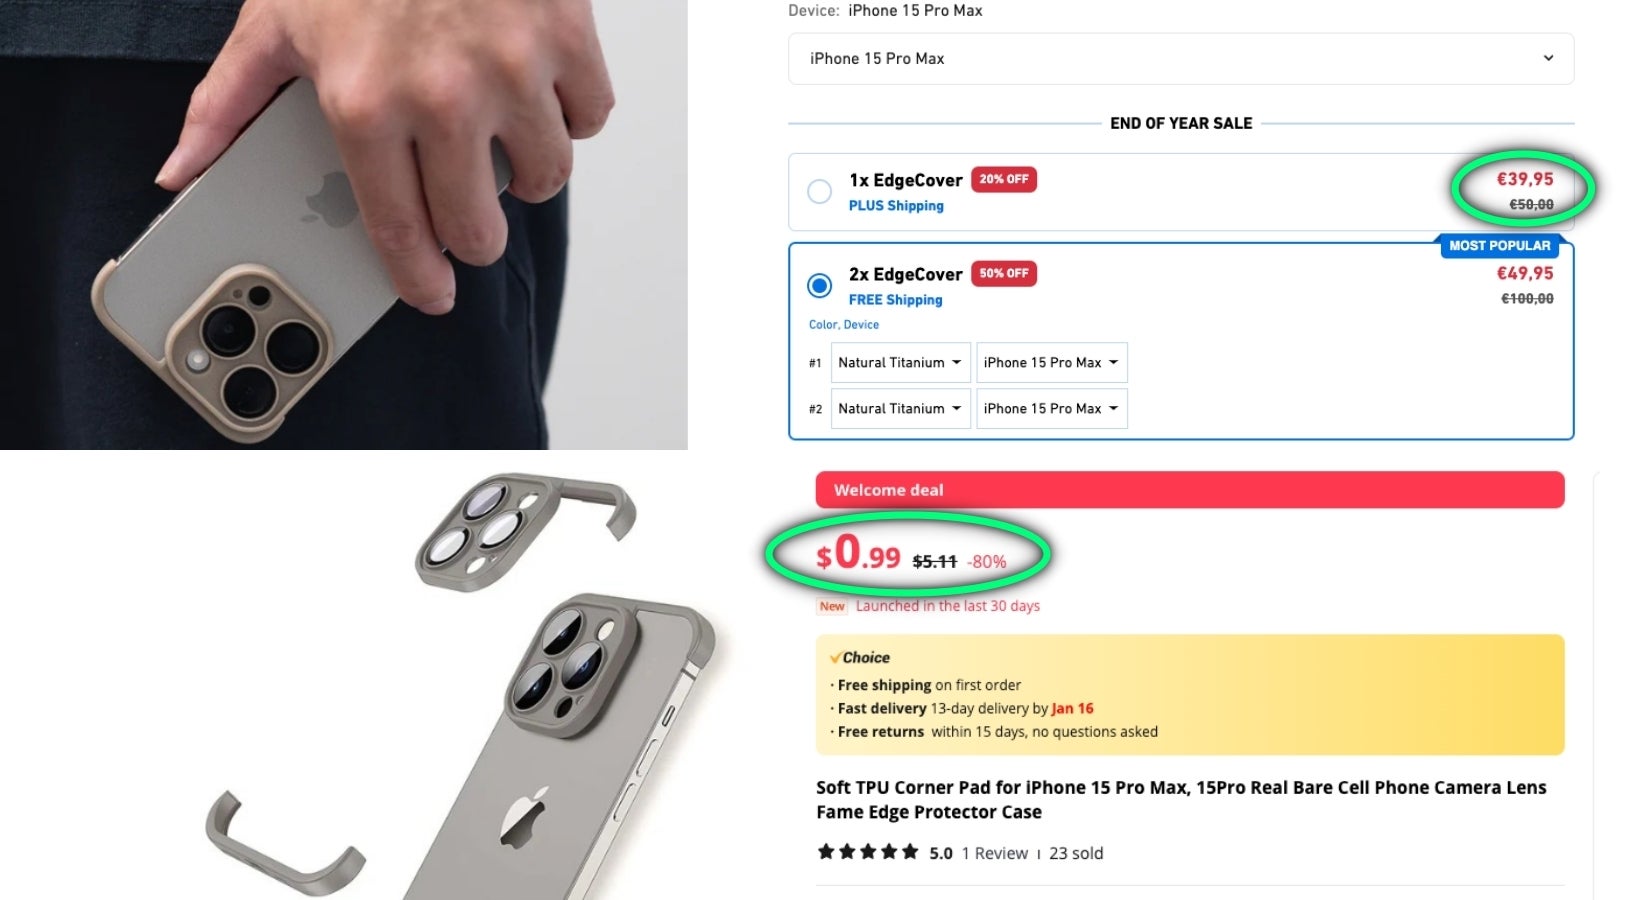 $50 vs $1 for the same iPhone bumper case? - Hundreds of people fall for this iPhone case scam: Stop overpaying for iPhone accessories